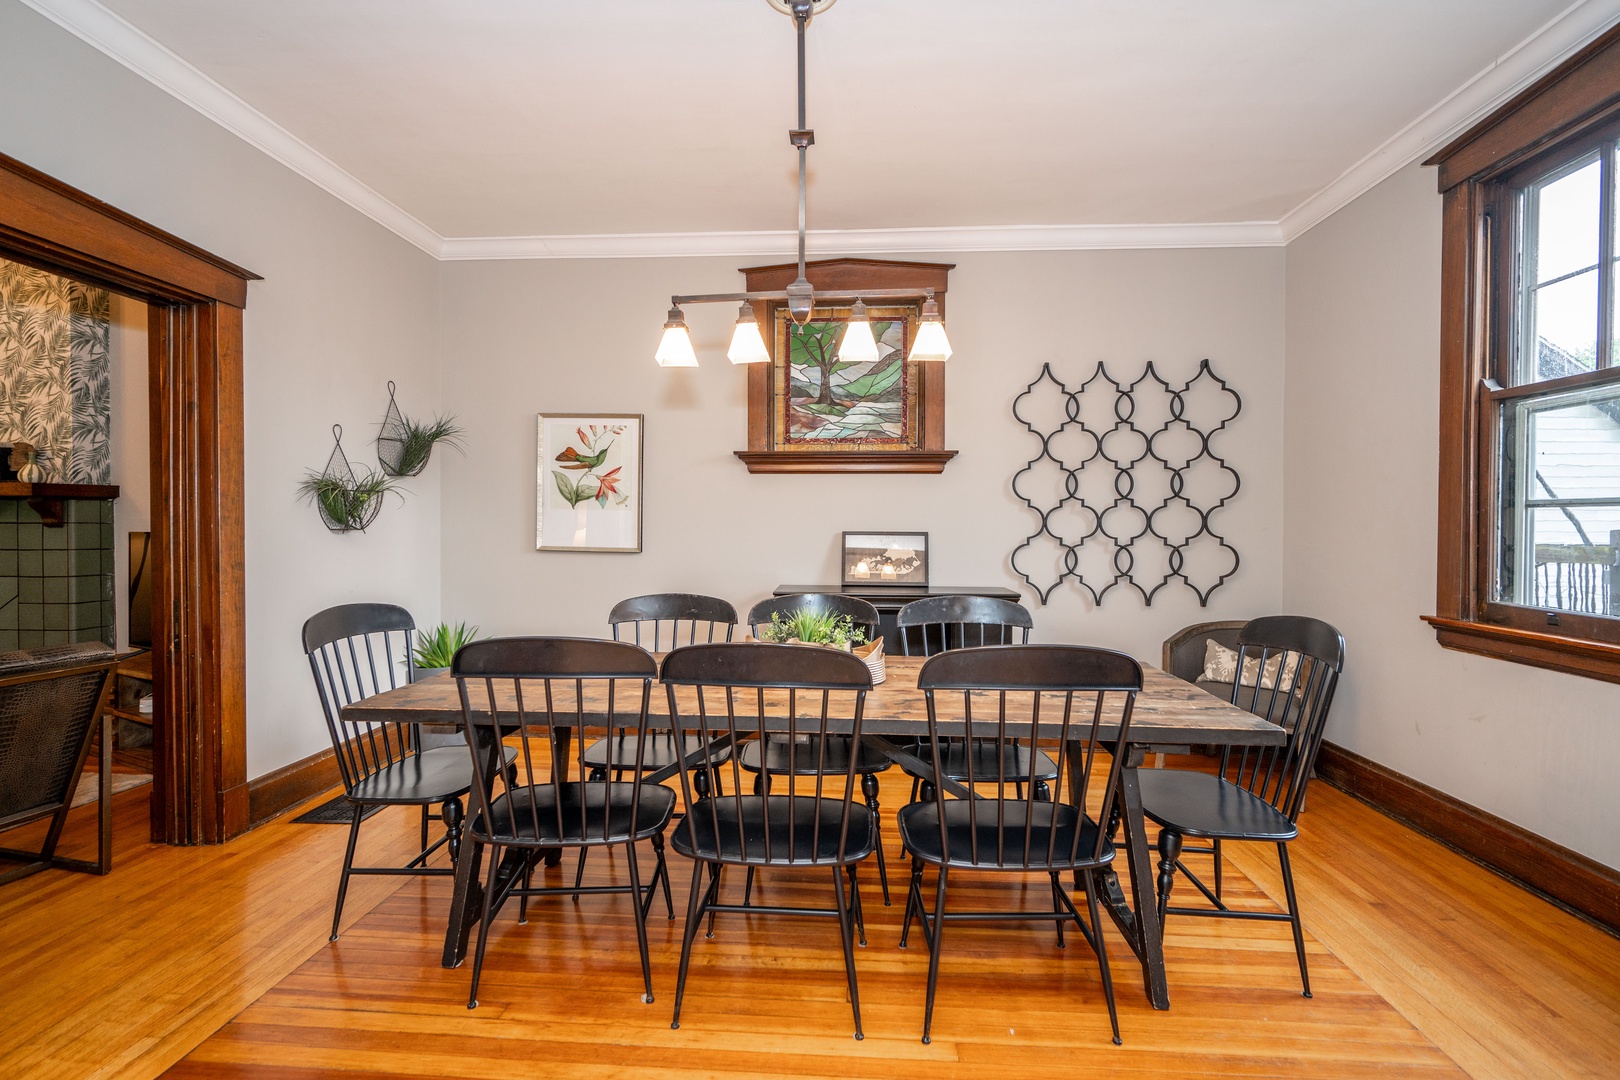 Gather for sophisticated meals together at the dining table, seating 8